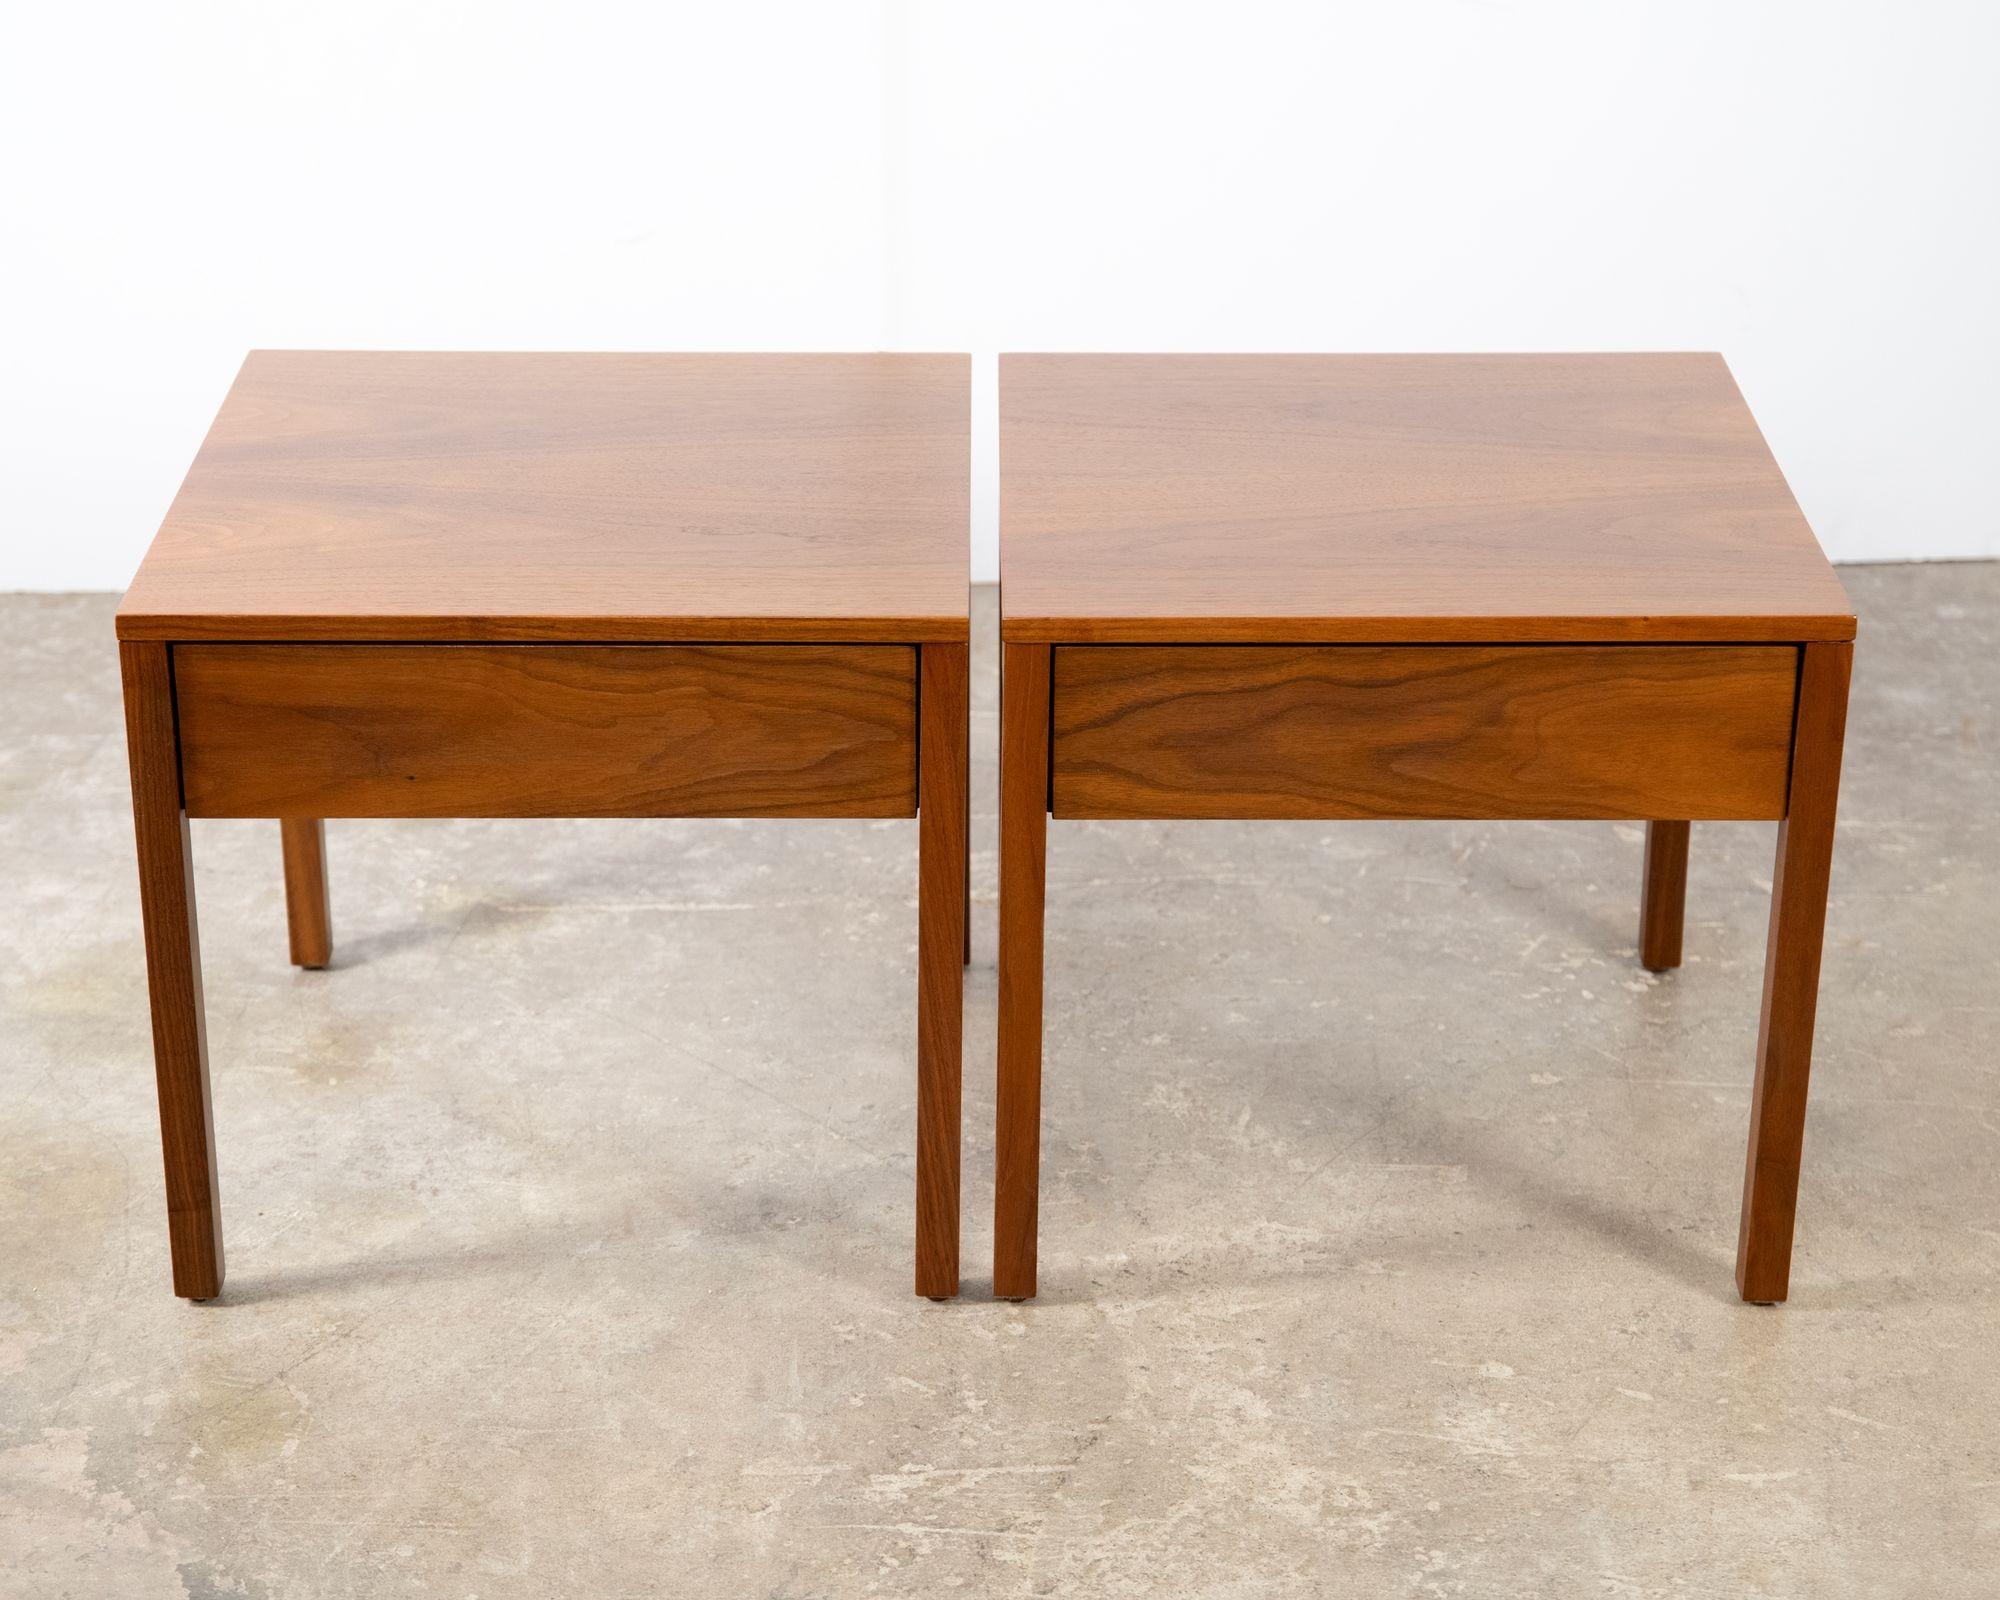 Florence Knoll Nightstands in Walnut for Knoll Associates Early Production For Sale 6